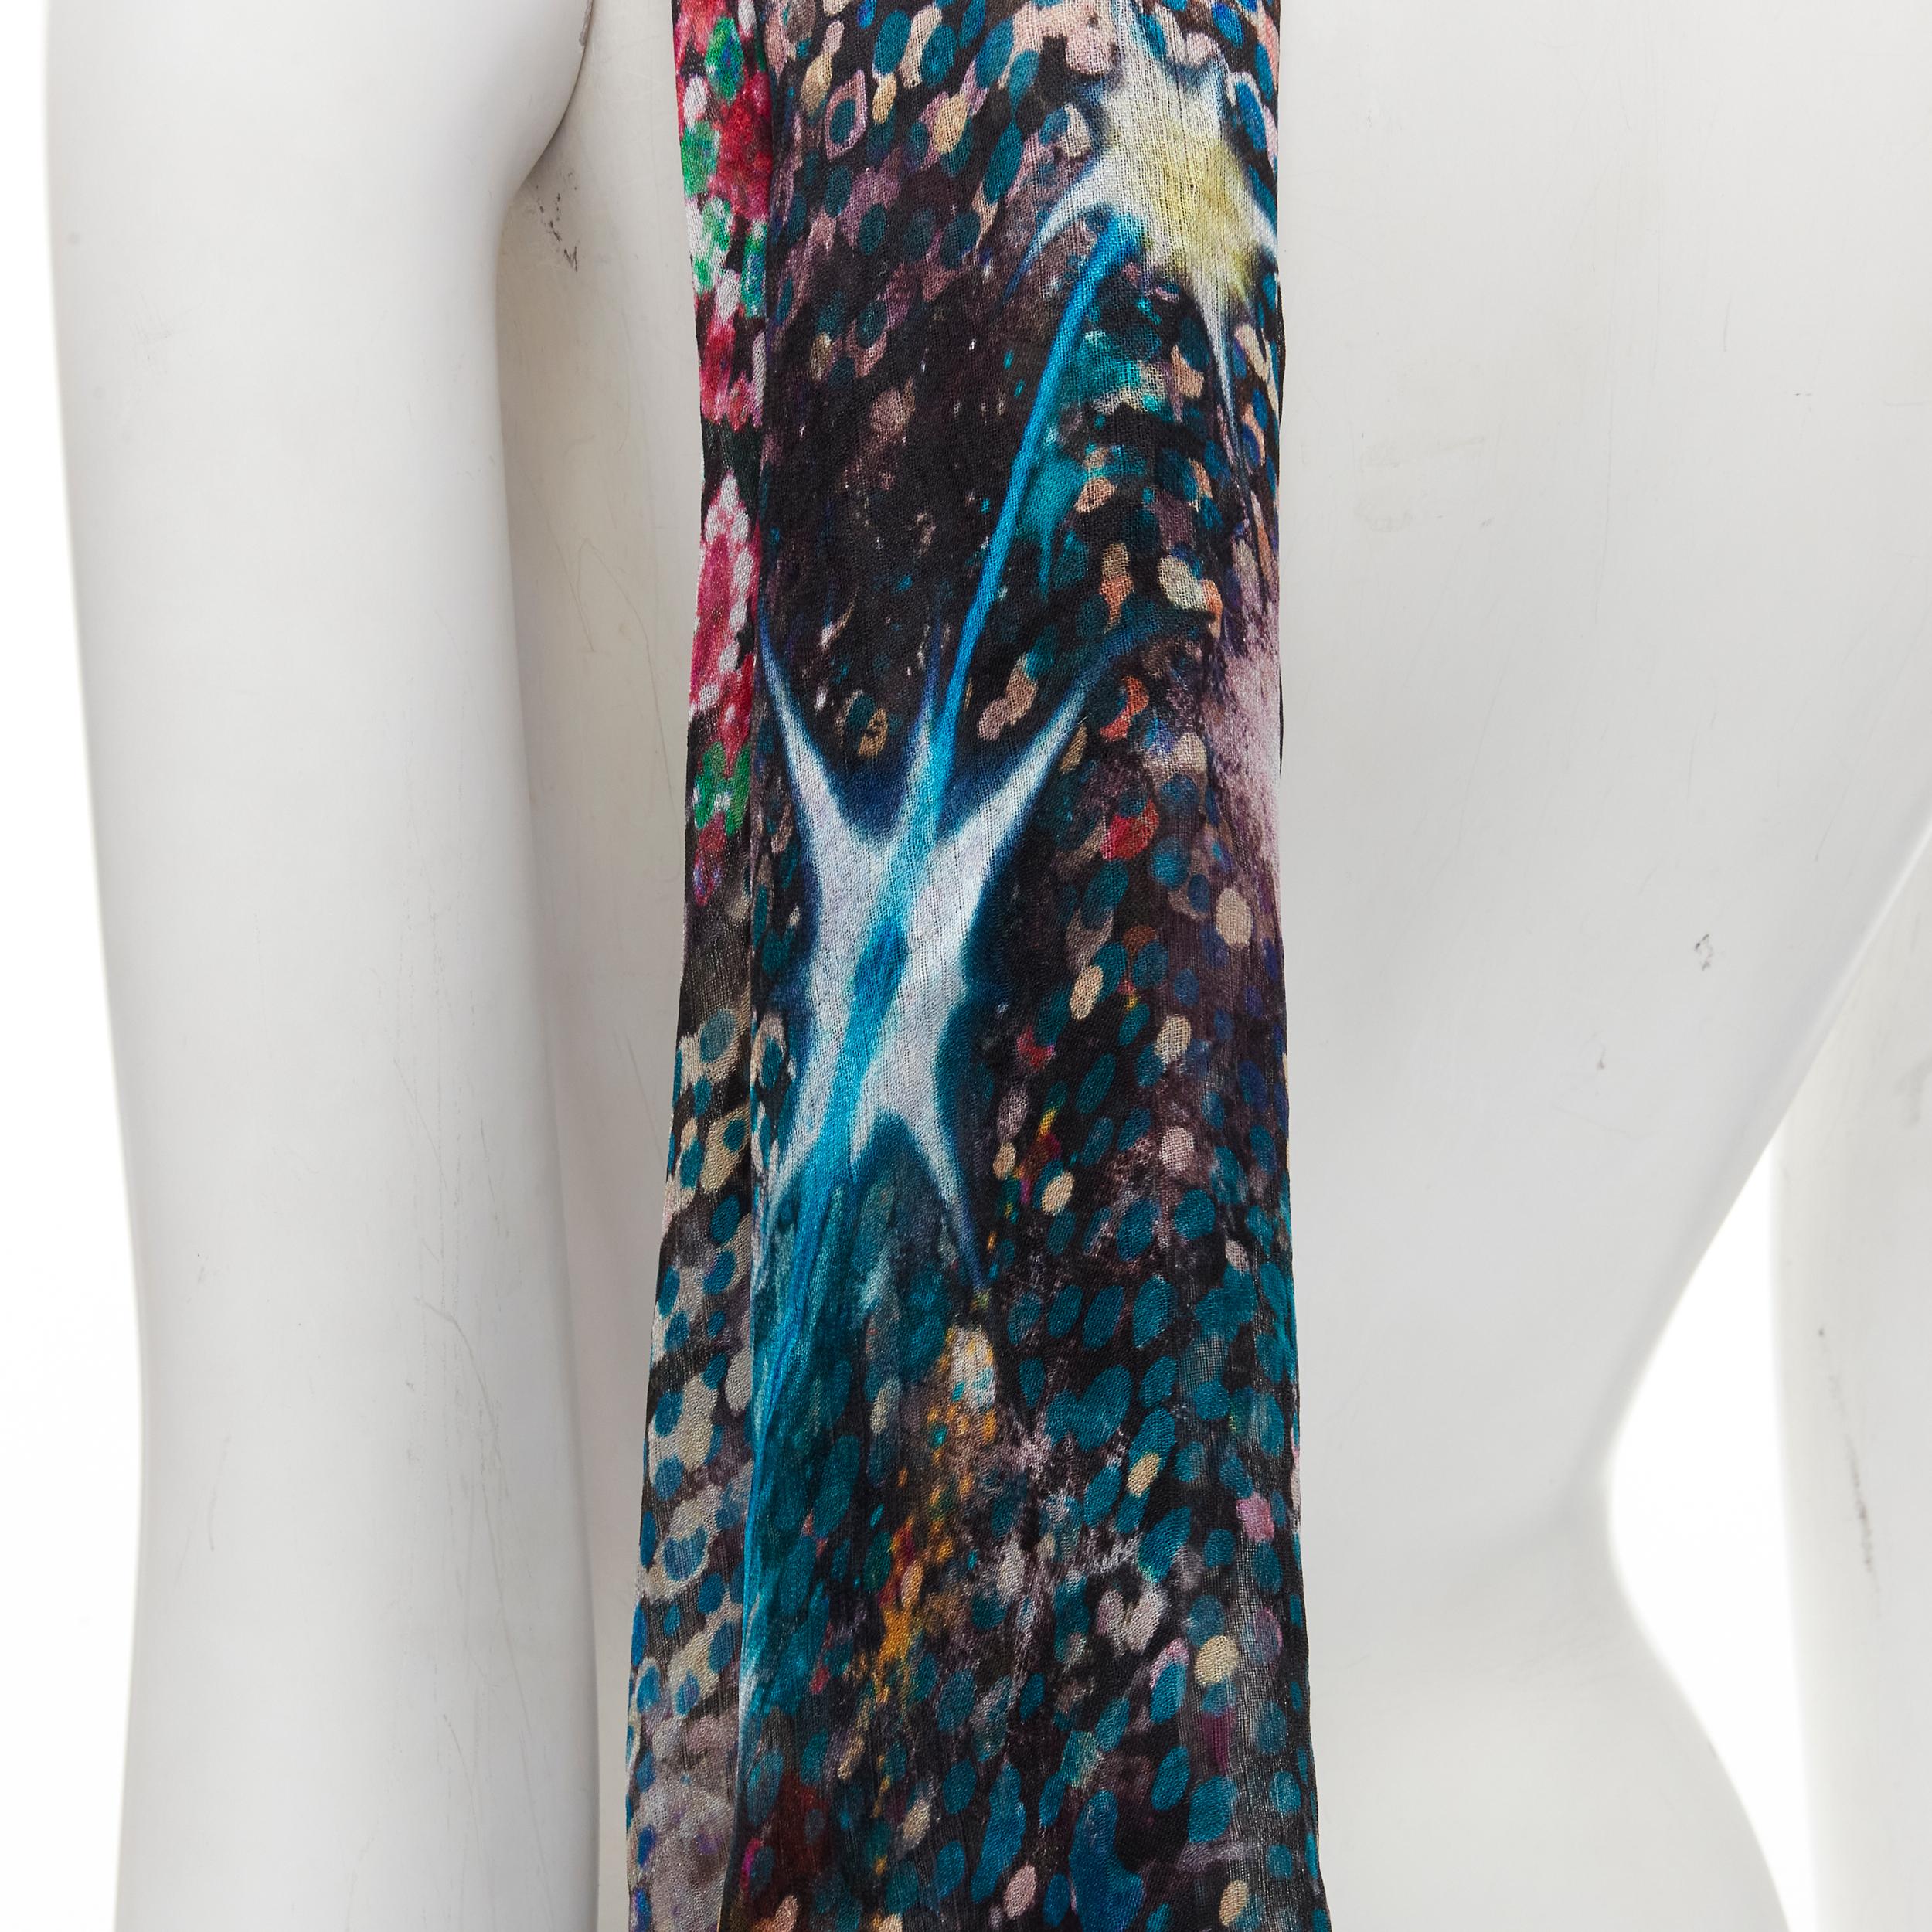 CHRISTIAN LACROIX 100% silk black futuristic galactic jewel space print scarf
Brand: Christian Lacroix
Material: 100% Silk
Color: Black
Pattern: Abstract
Extra Detail: Frayed edge.
Made in: Italy

CONDITION:
Condition: Excellent, this item was